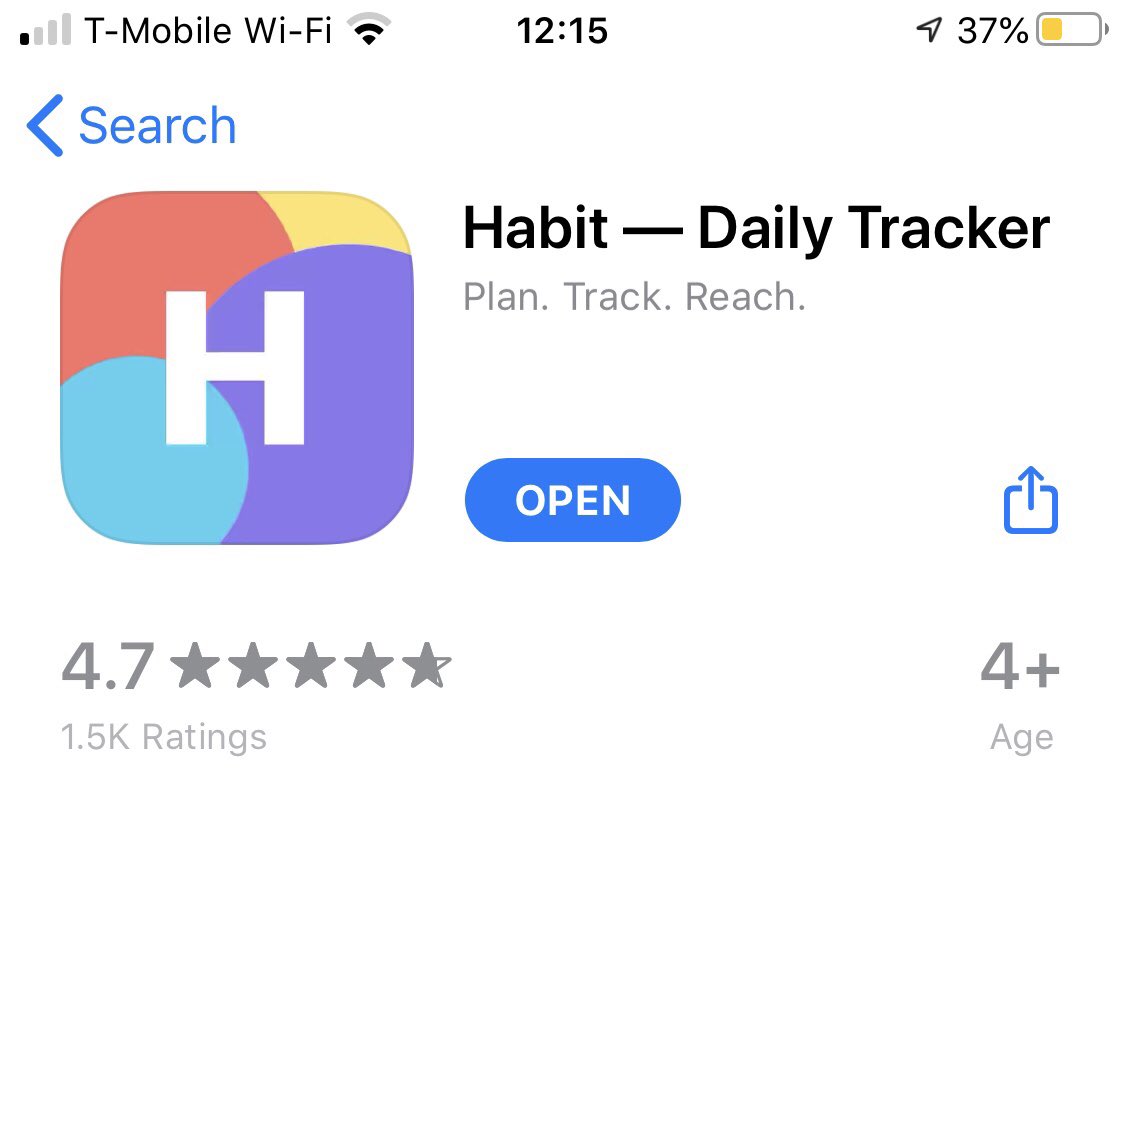 For forming new habits (Anki) that’ll last. Lots of notifications, graphs, pastel colors, all that fun stuff. Cool, I have nothing else! Feel free to add, whatever!